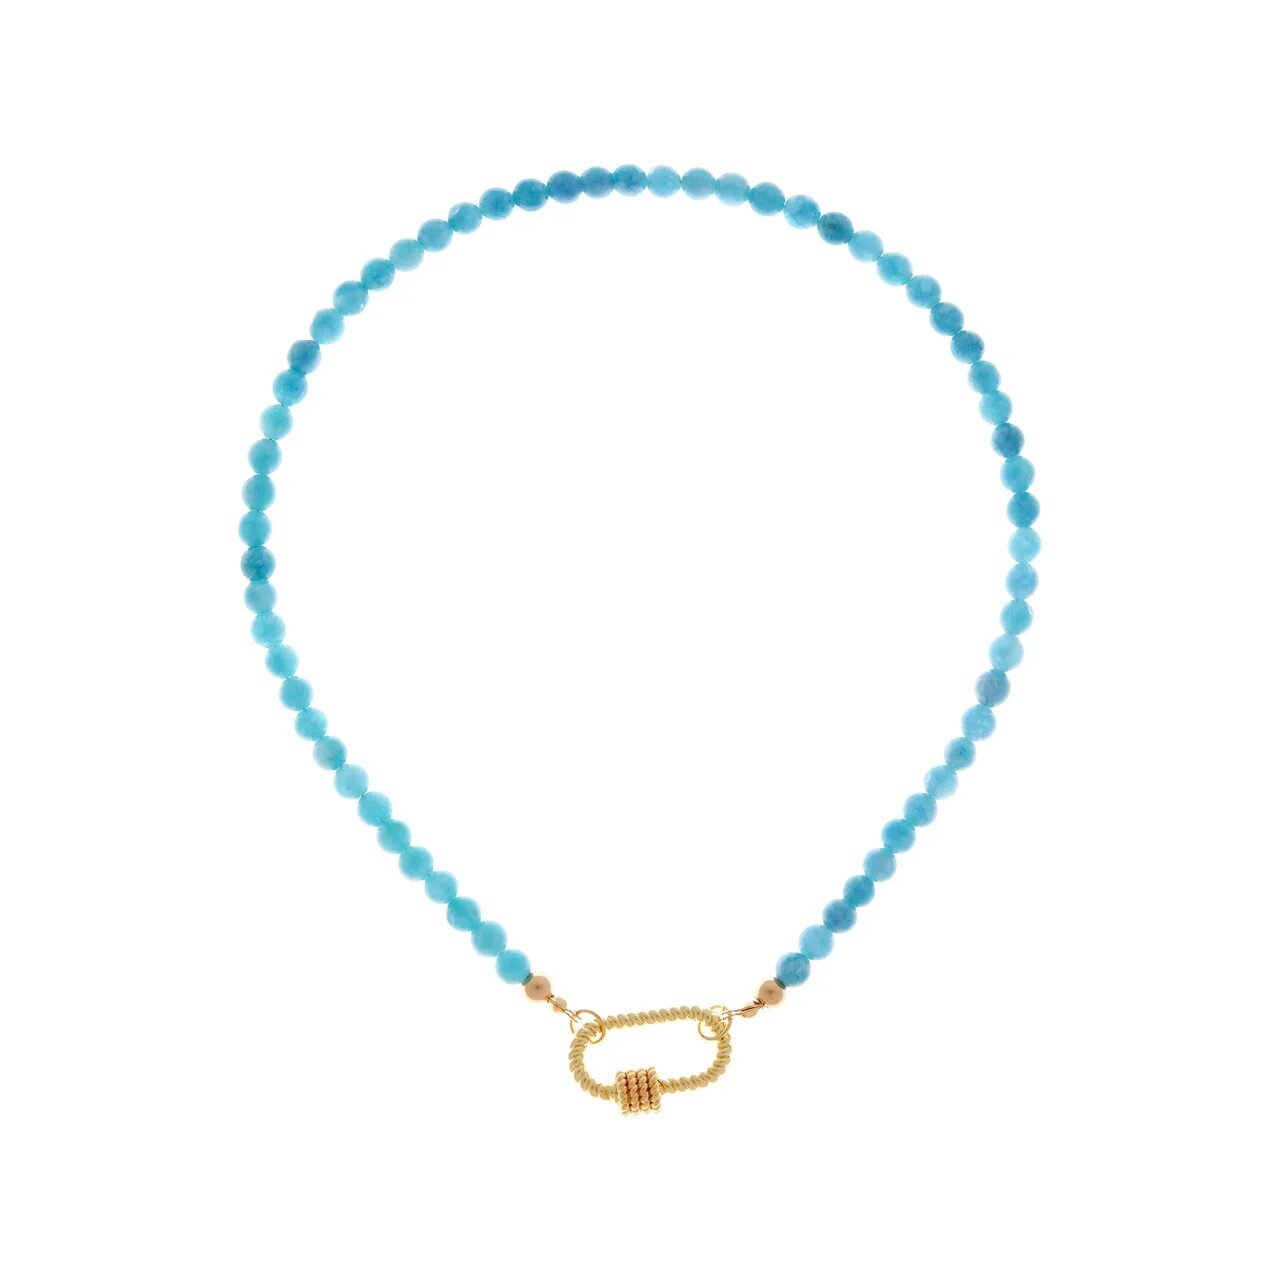 HOLLY JUNE Колье Carabiner Gold Turquoise Necklace колье holly june turquoise star necklace 1 шт